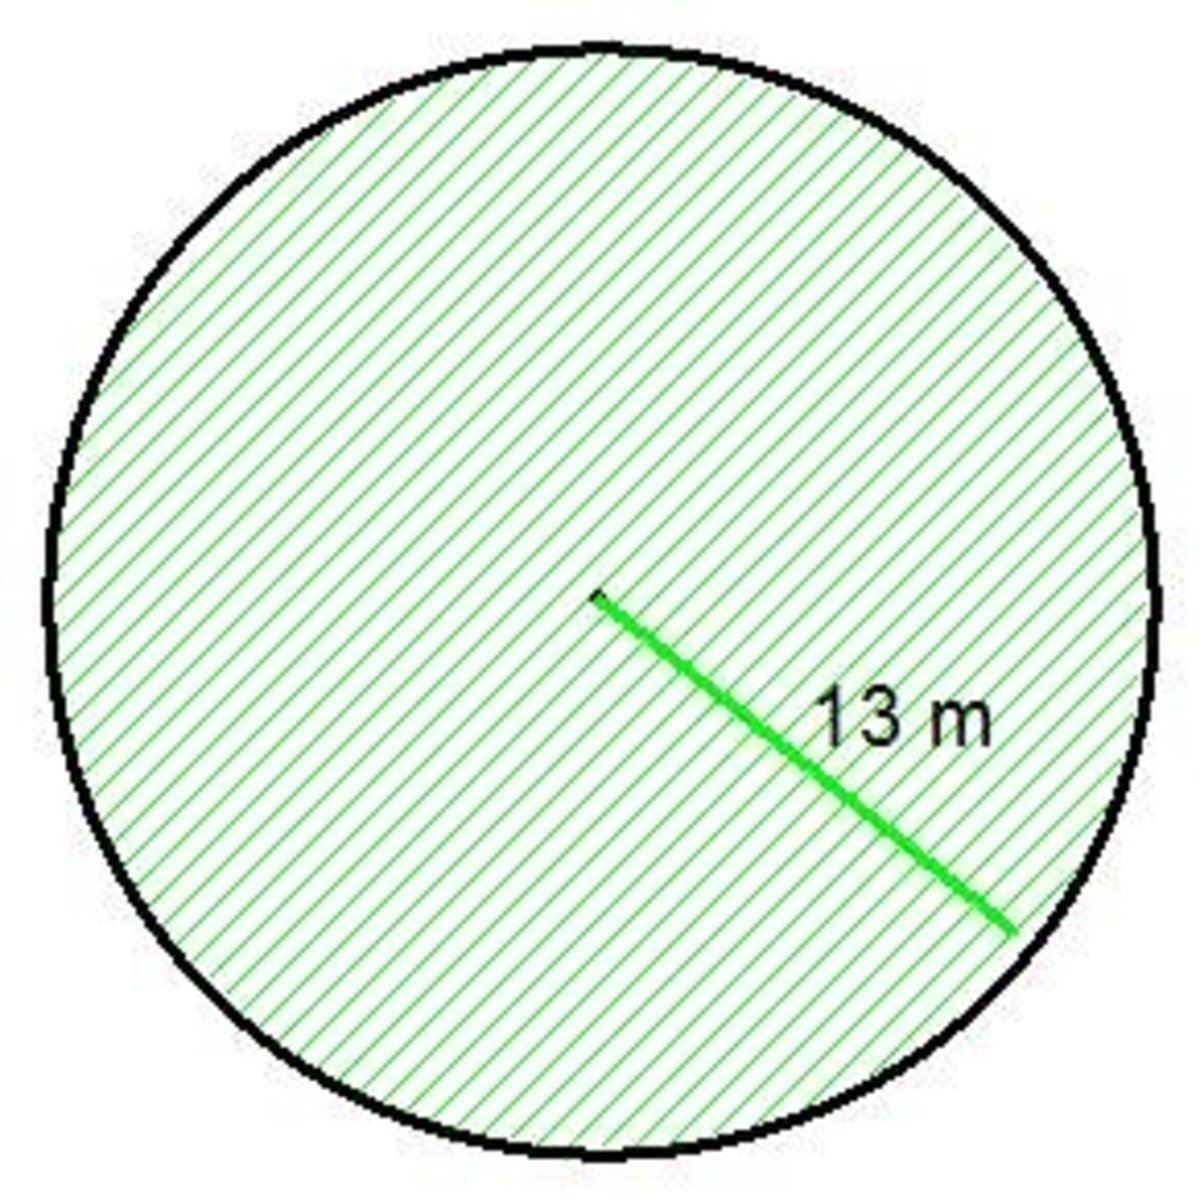 Math Help How To Calculate The Area Of Circle And Get An Answer